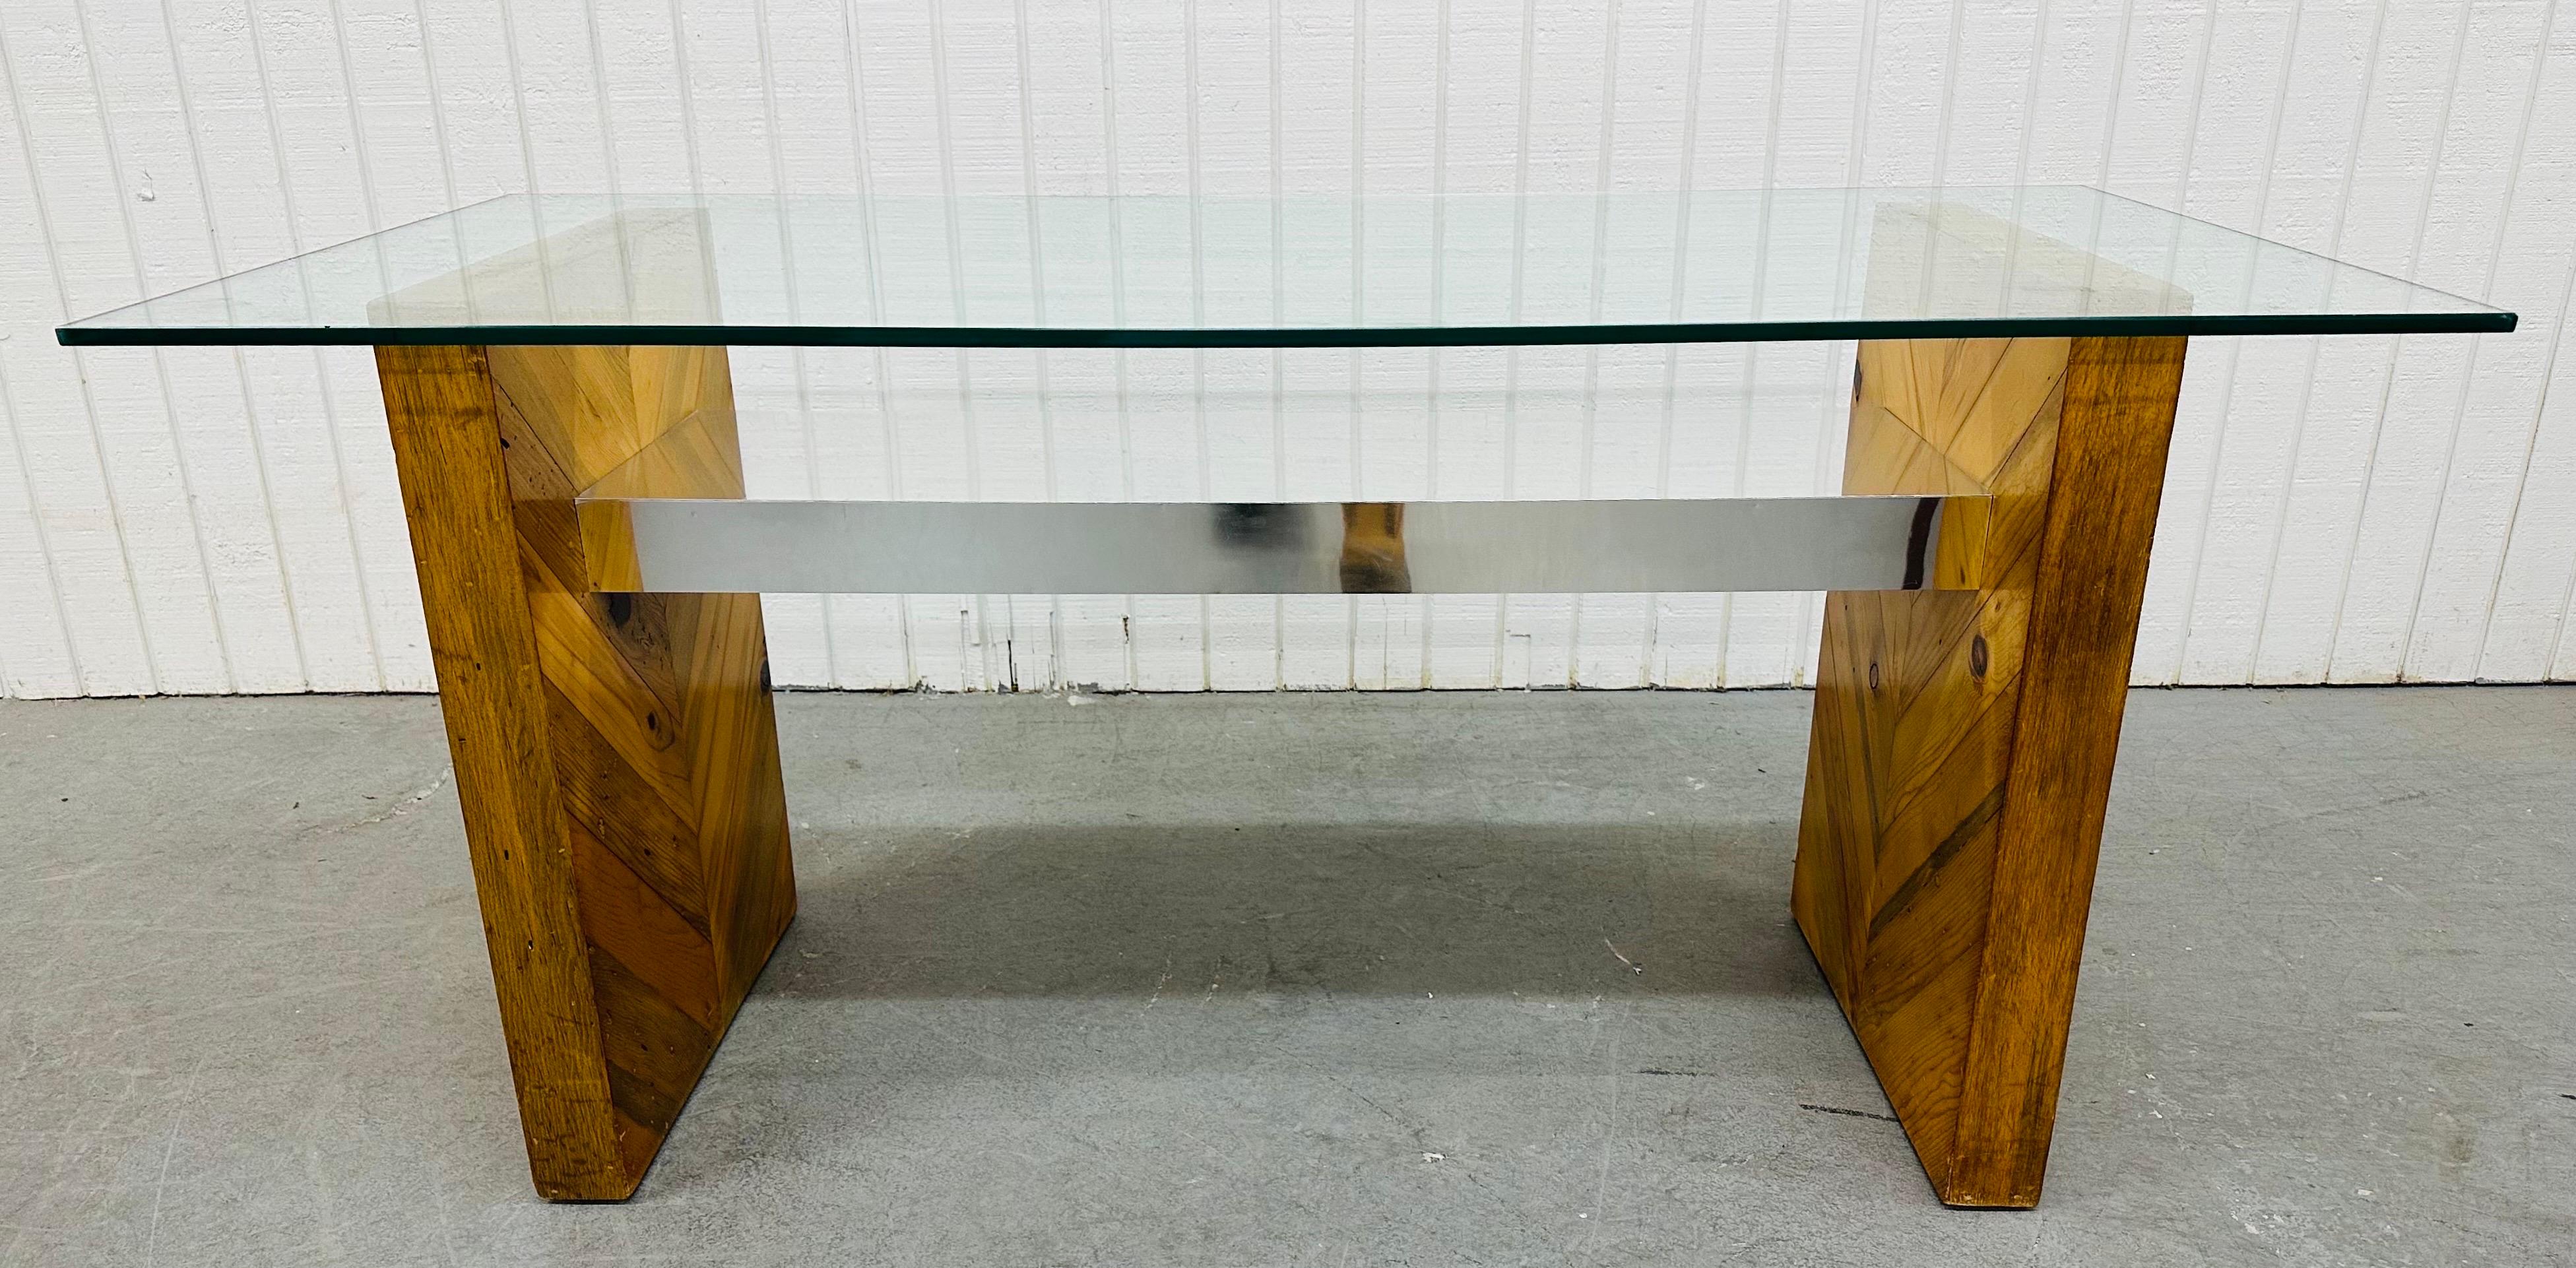 This listing is for a Vintage Modern Paul Evans Style Glass Console Table. Featuring a rectangular glass top, mixed wood and chrome pedestal base, and a beautiful design in the style of Paul Evans!